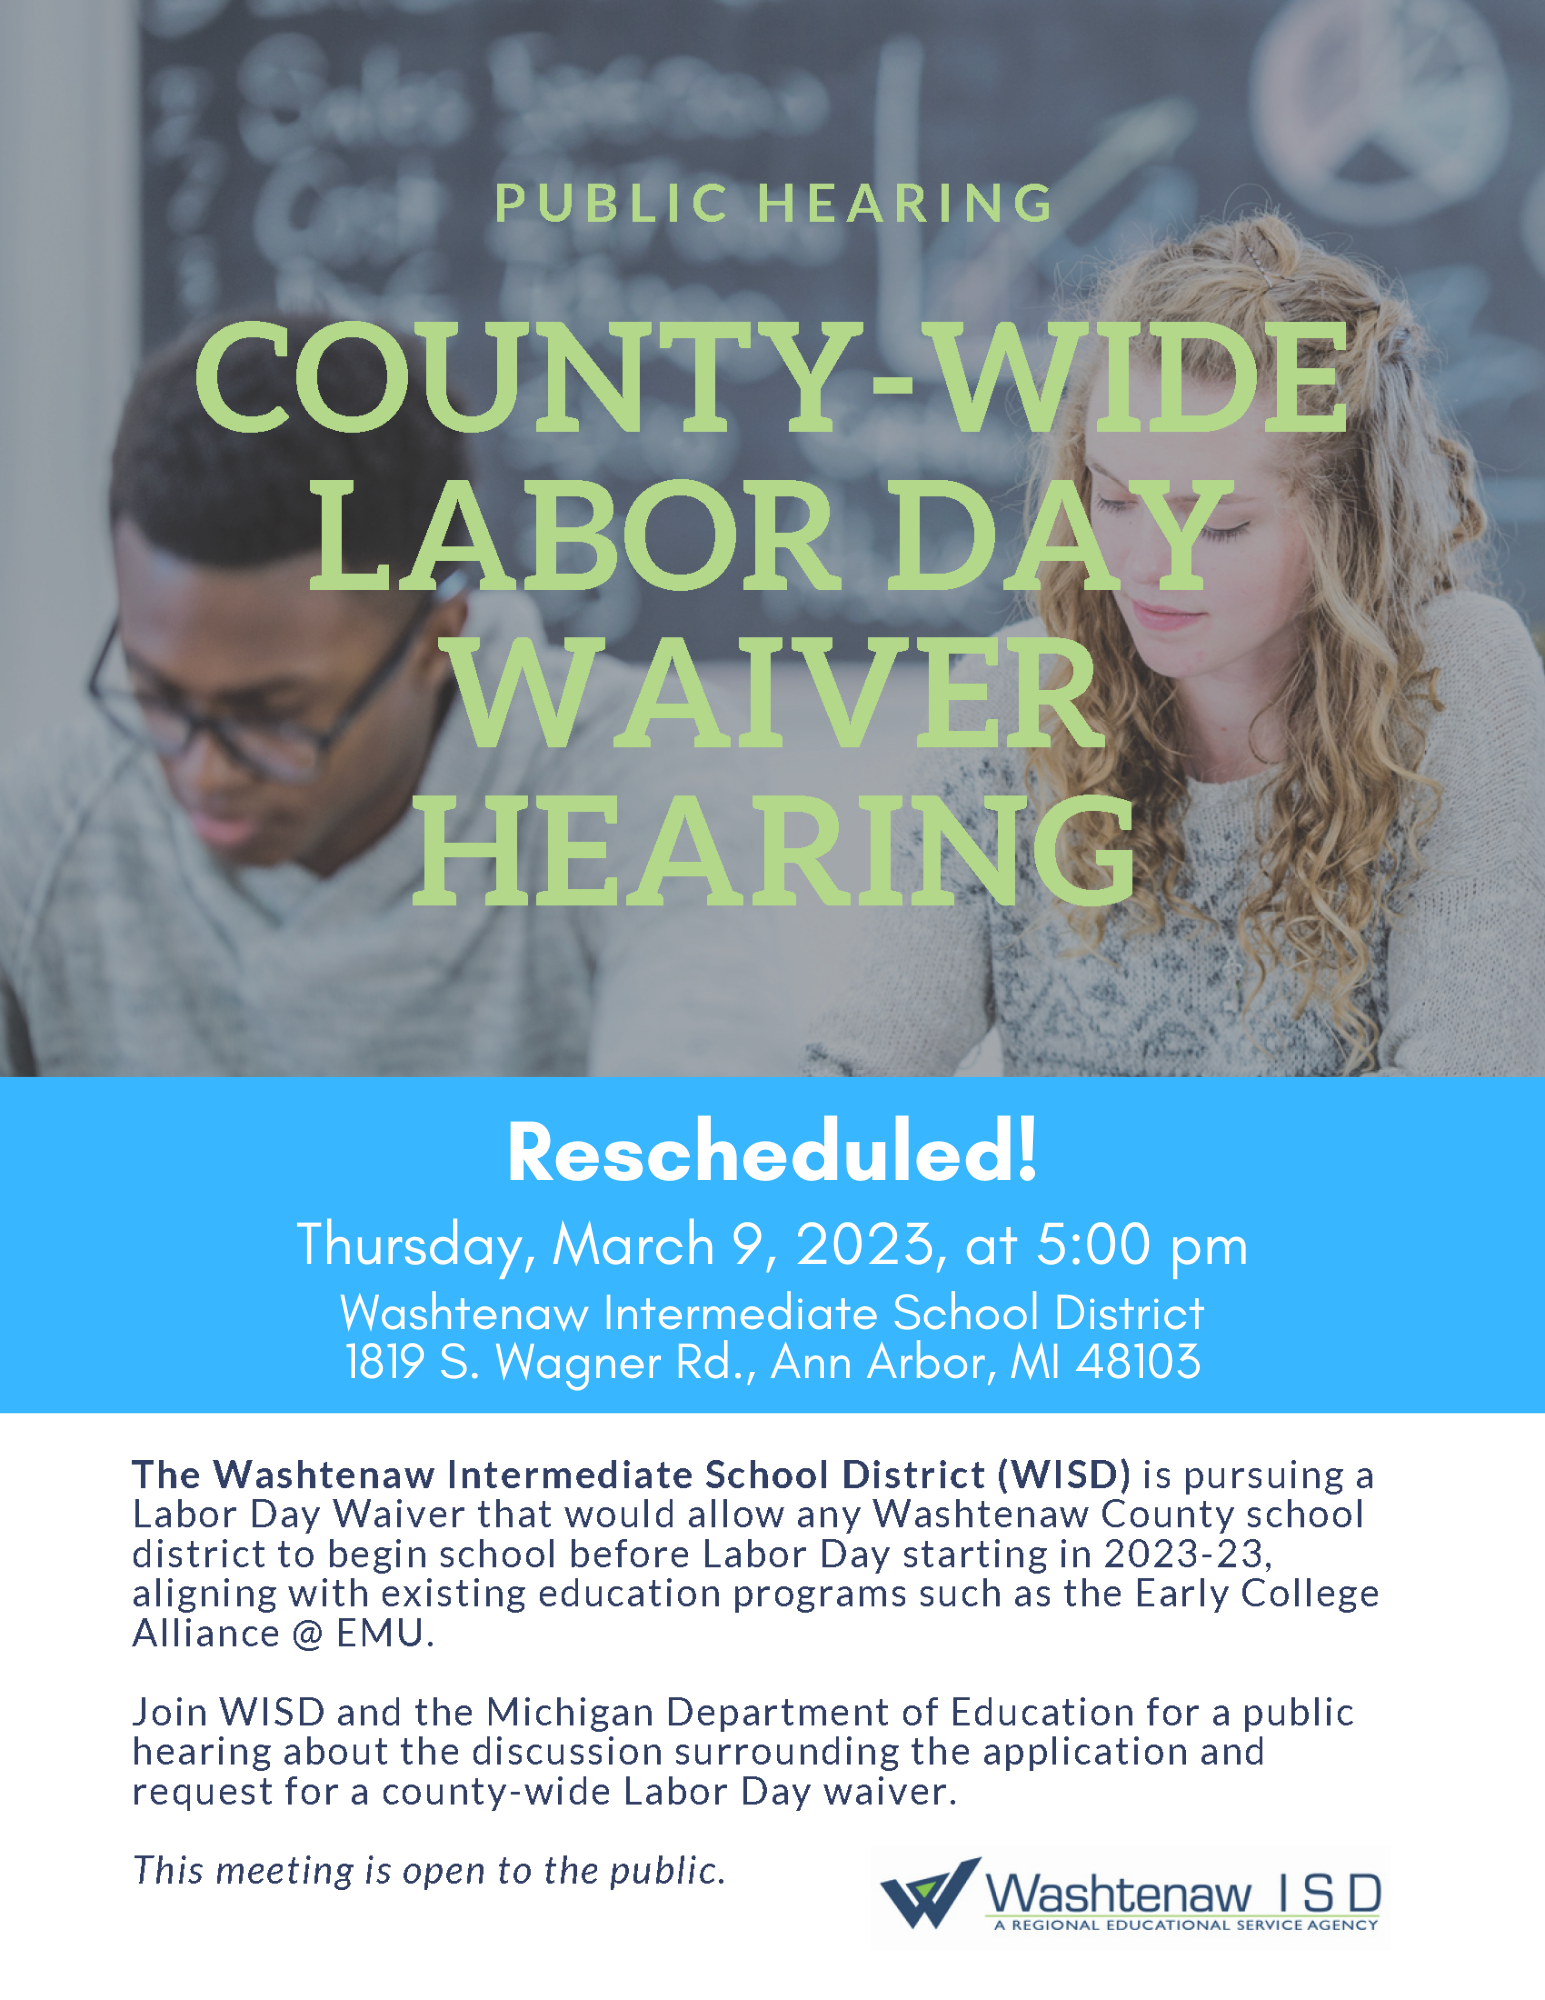 Public Hearing for the County-wide Labor Day Waiver is rescheduled to Thursday, March 9 at 5:00 pm at the Washtenaw ISD.